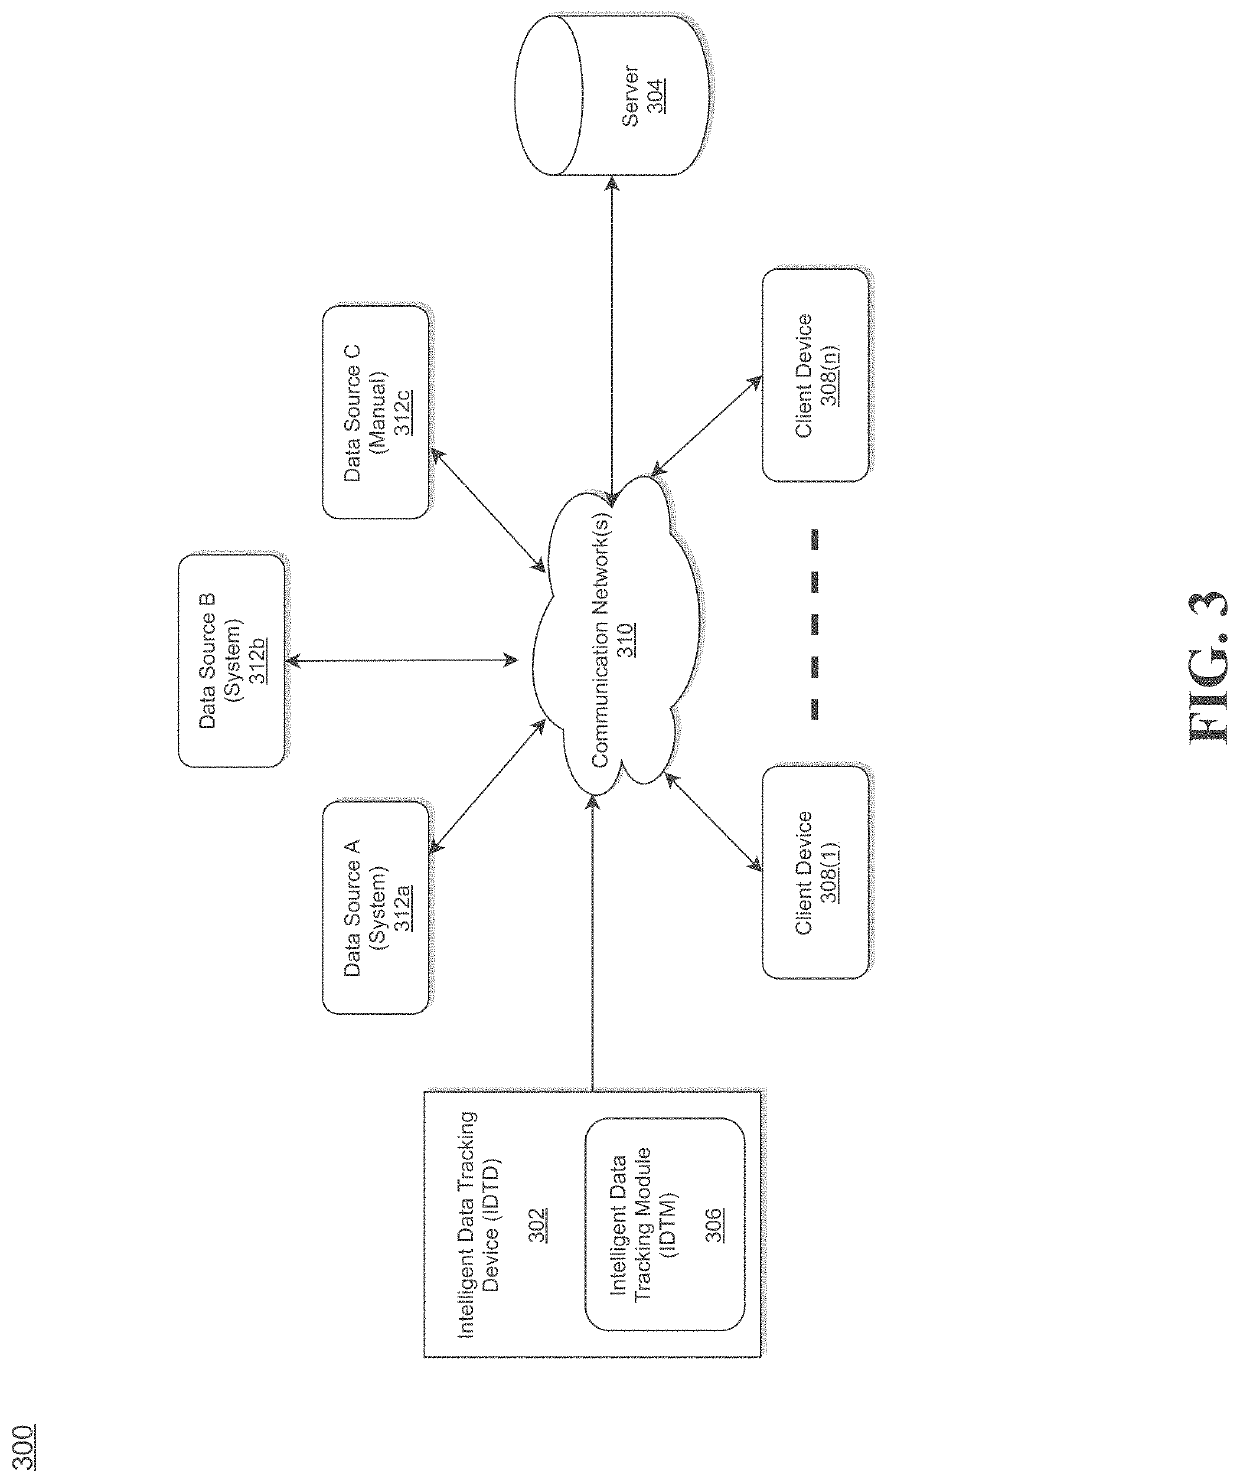 System and method for intelligent tracking of data